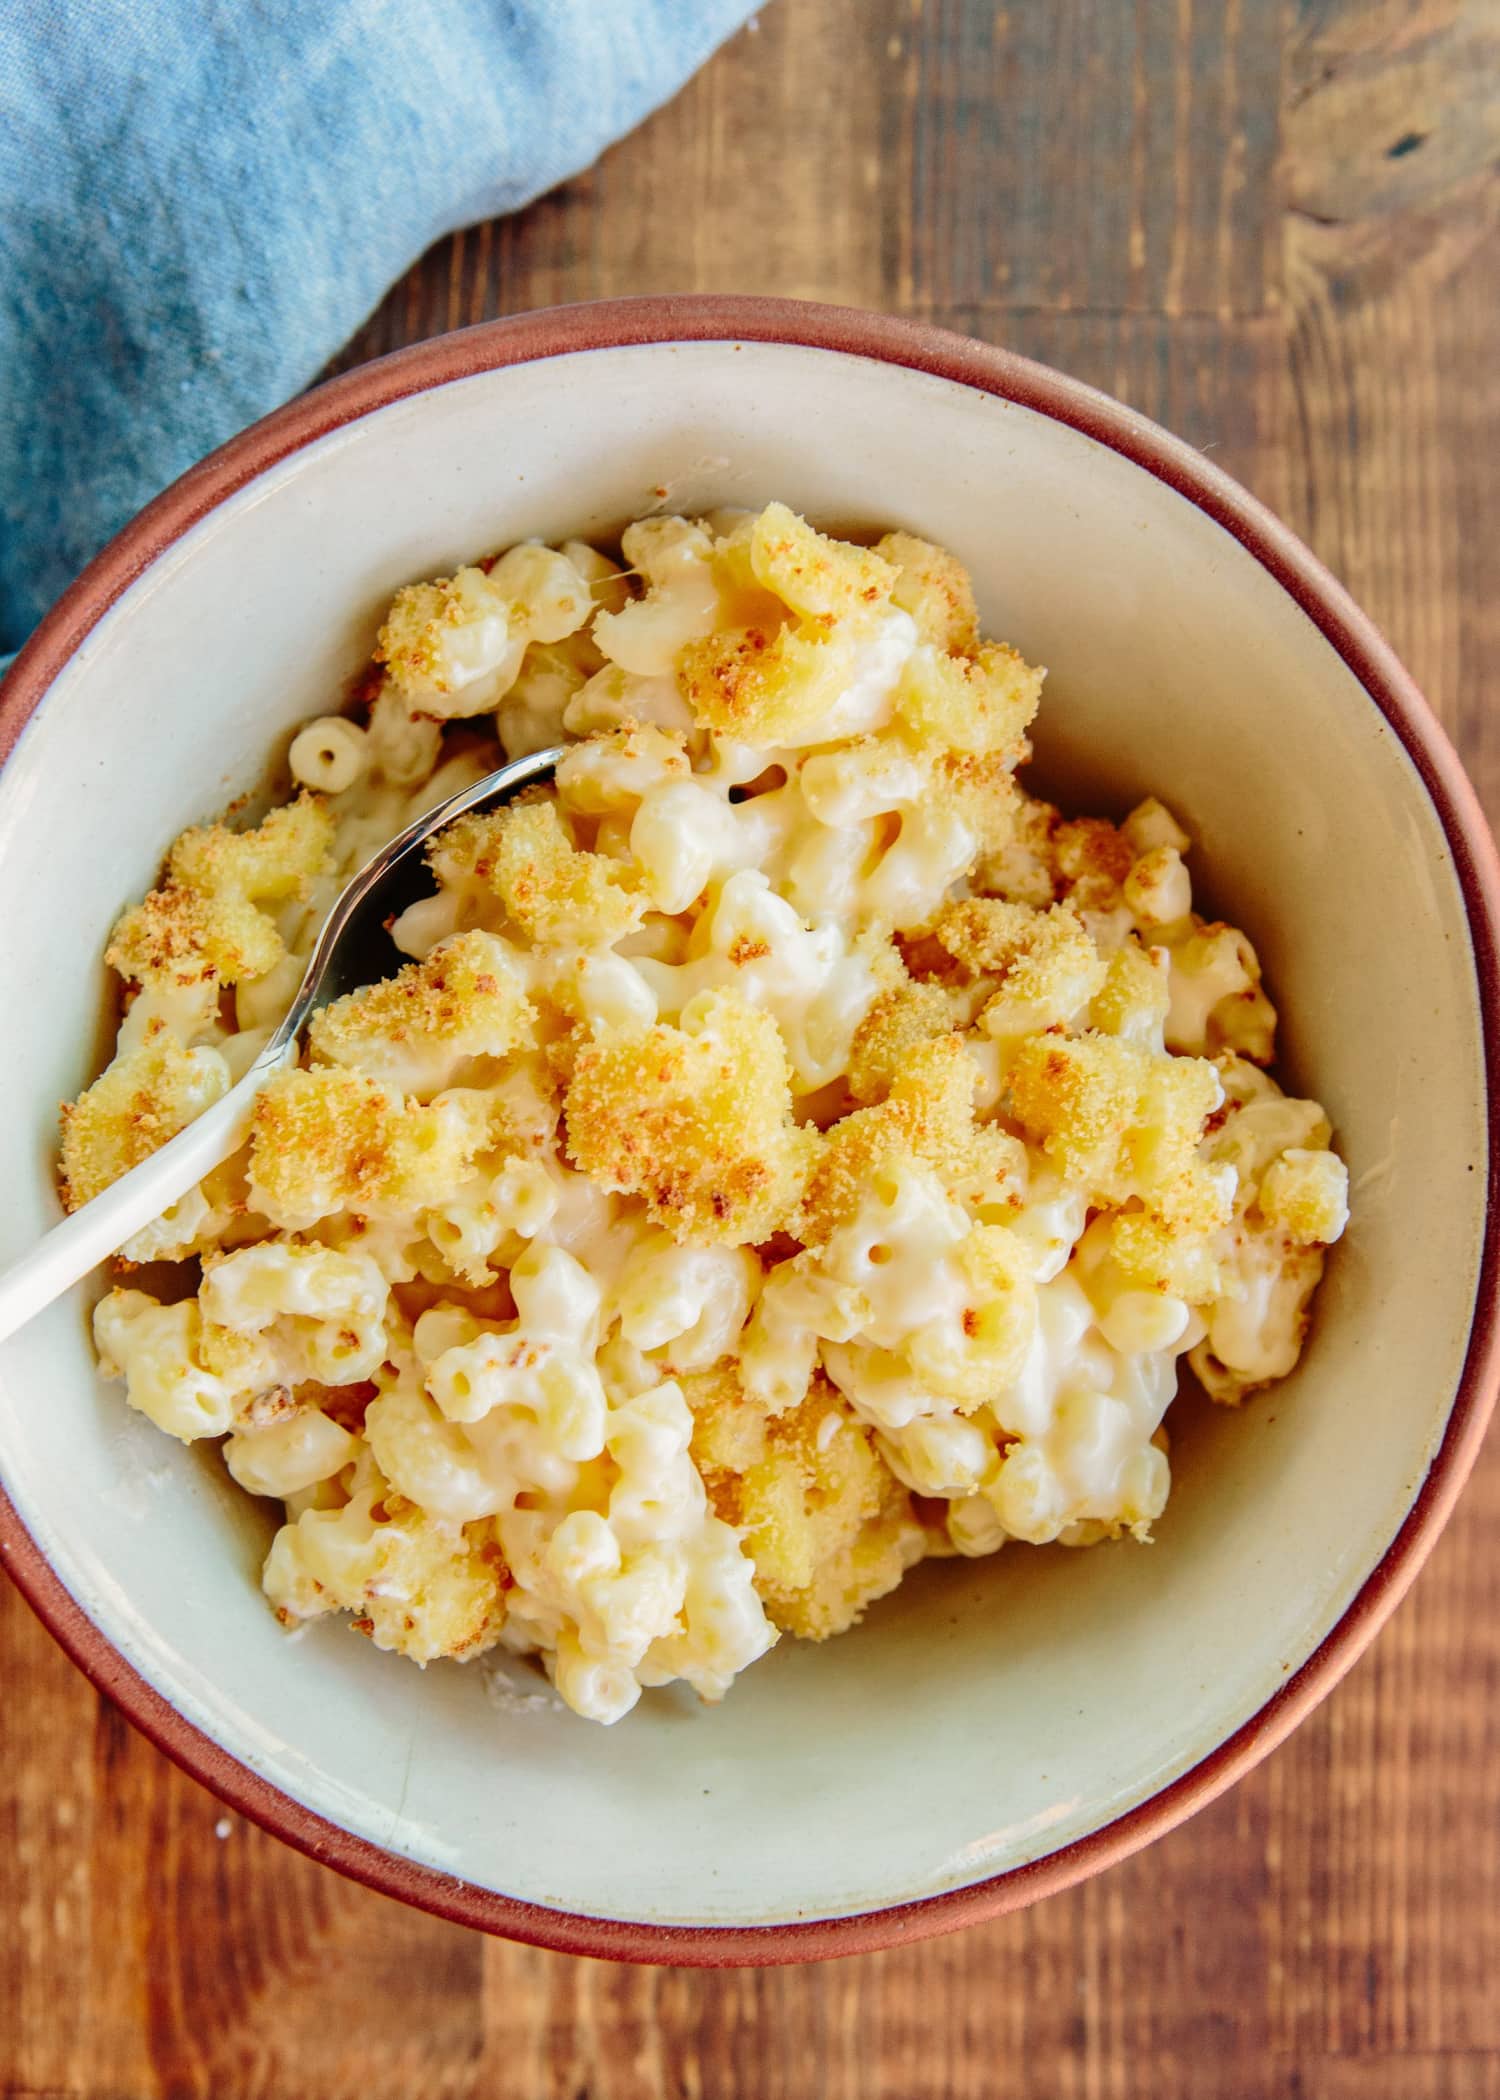 How To Make Classic Baked Macaroni & Cheese | Kitchn